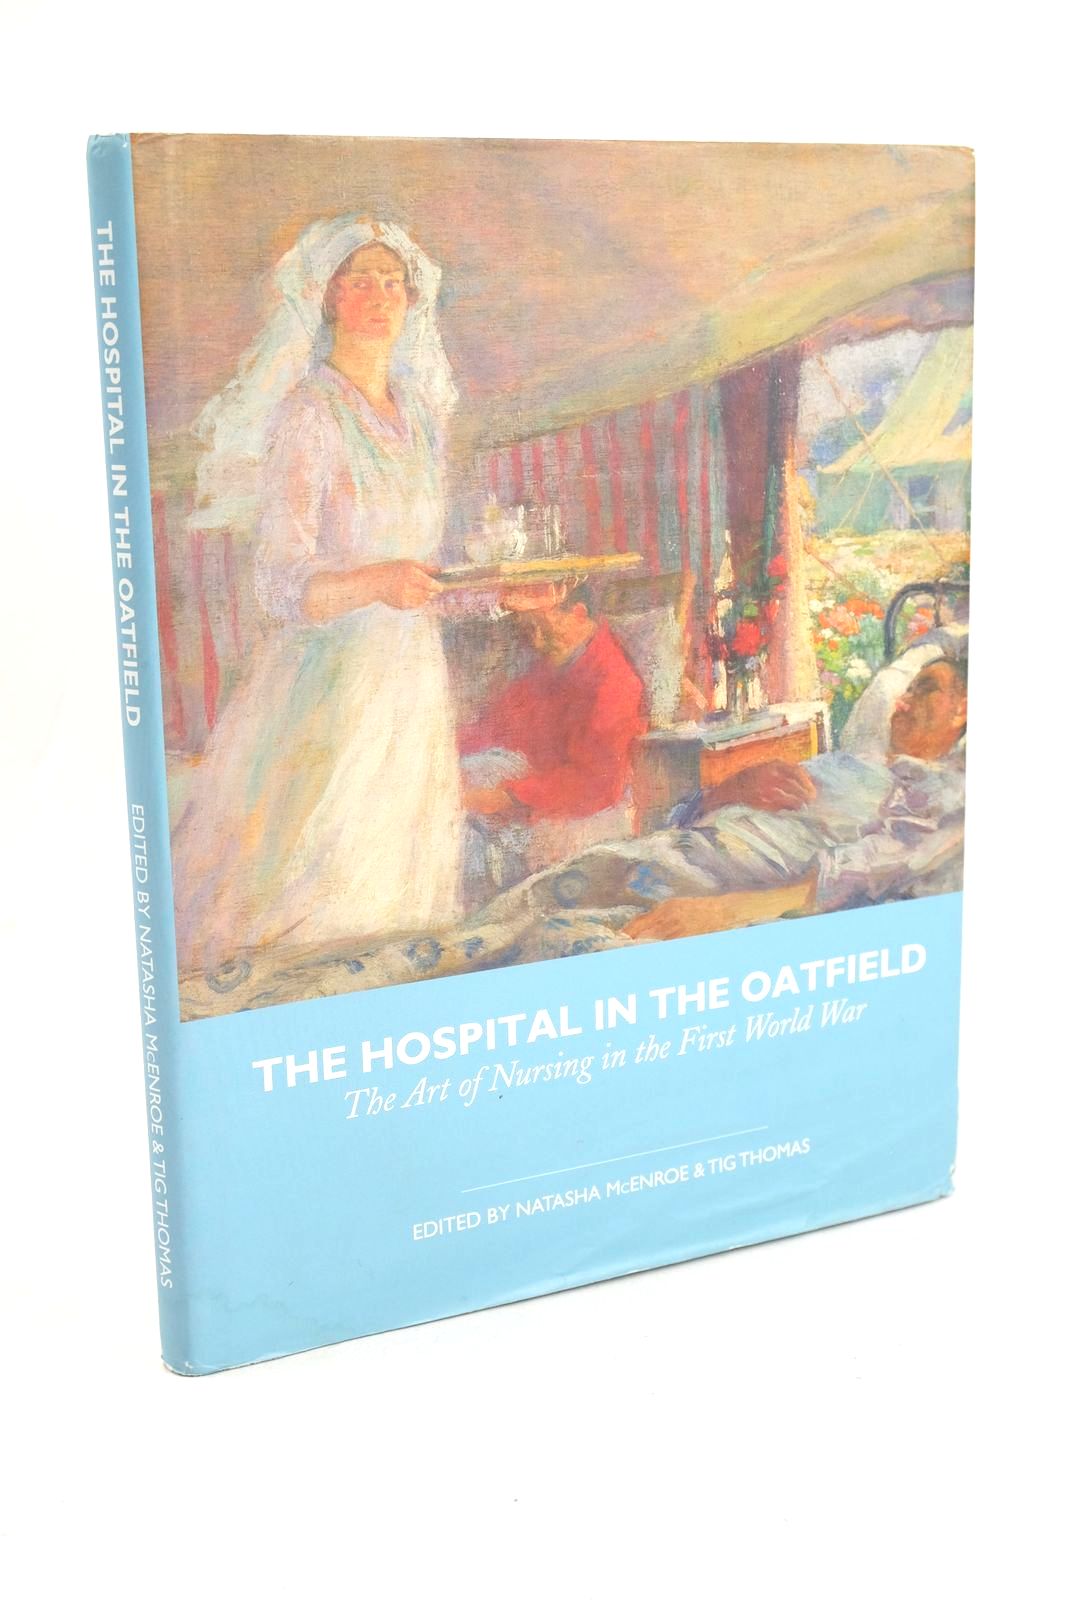 Photo of THE HOSPITAL IN THE OATFIELD: THE ART OF NURSING IN THE FIRST WORLD WAR- Stock Number: 1327479